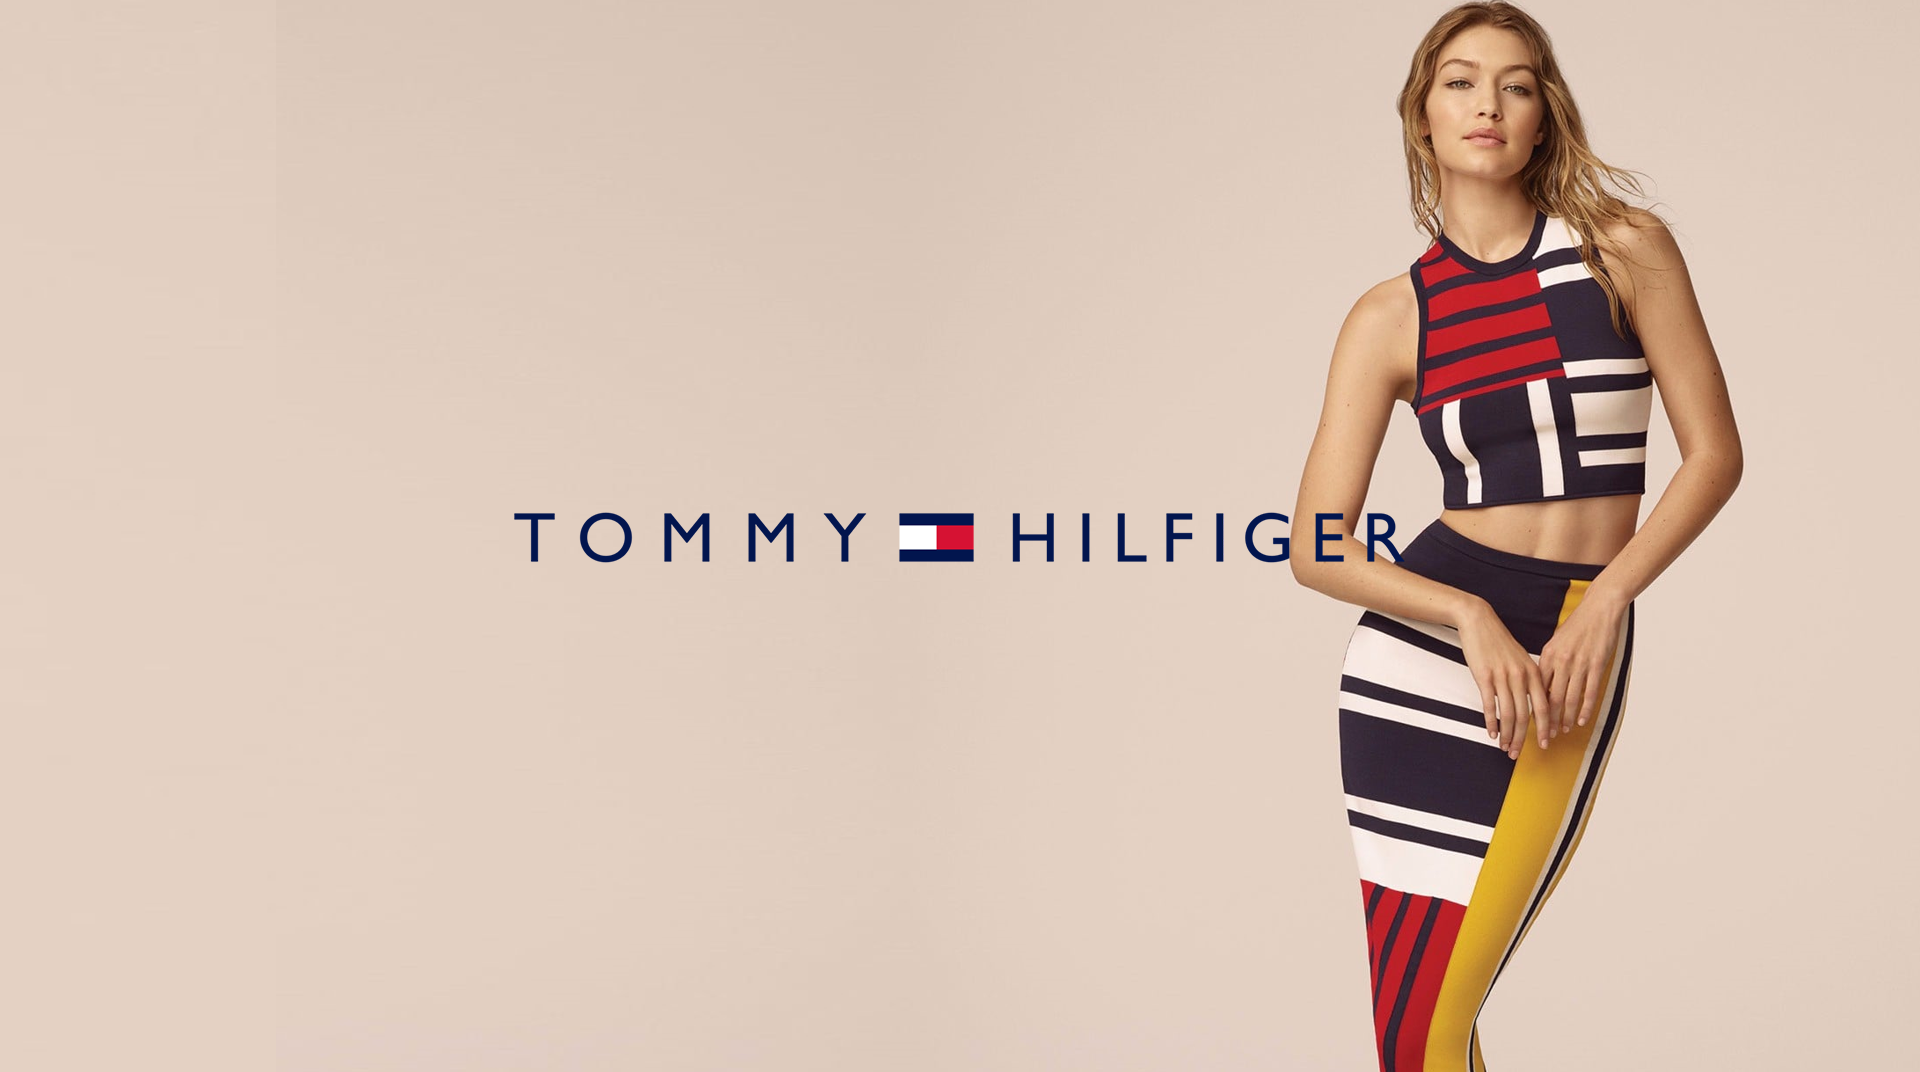 Tommy Hilfiger Europe | Pan-Europees customer loyalty programma gericht op customer experience en brand engagement in fashion retail